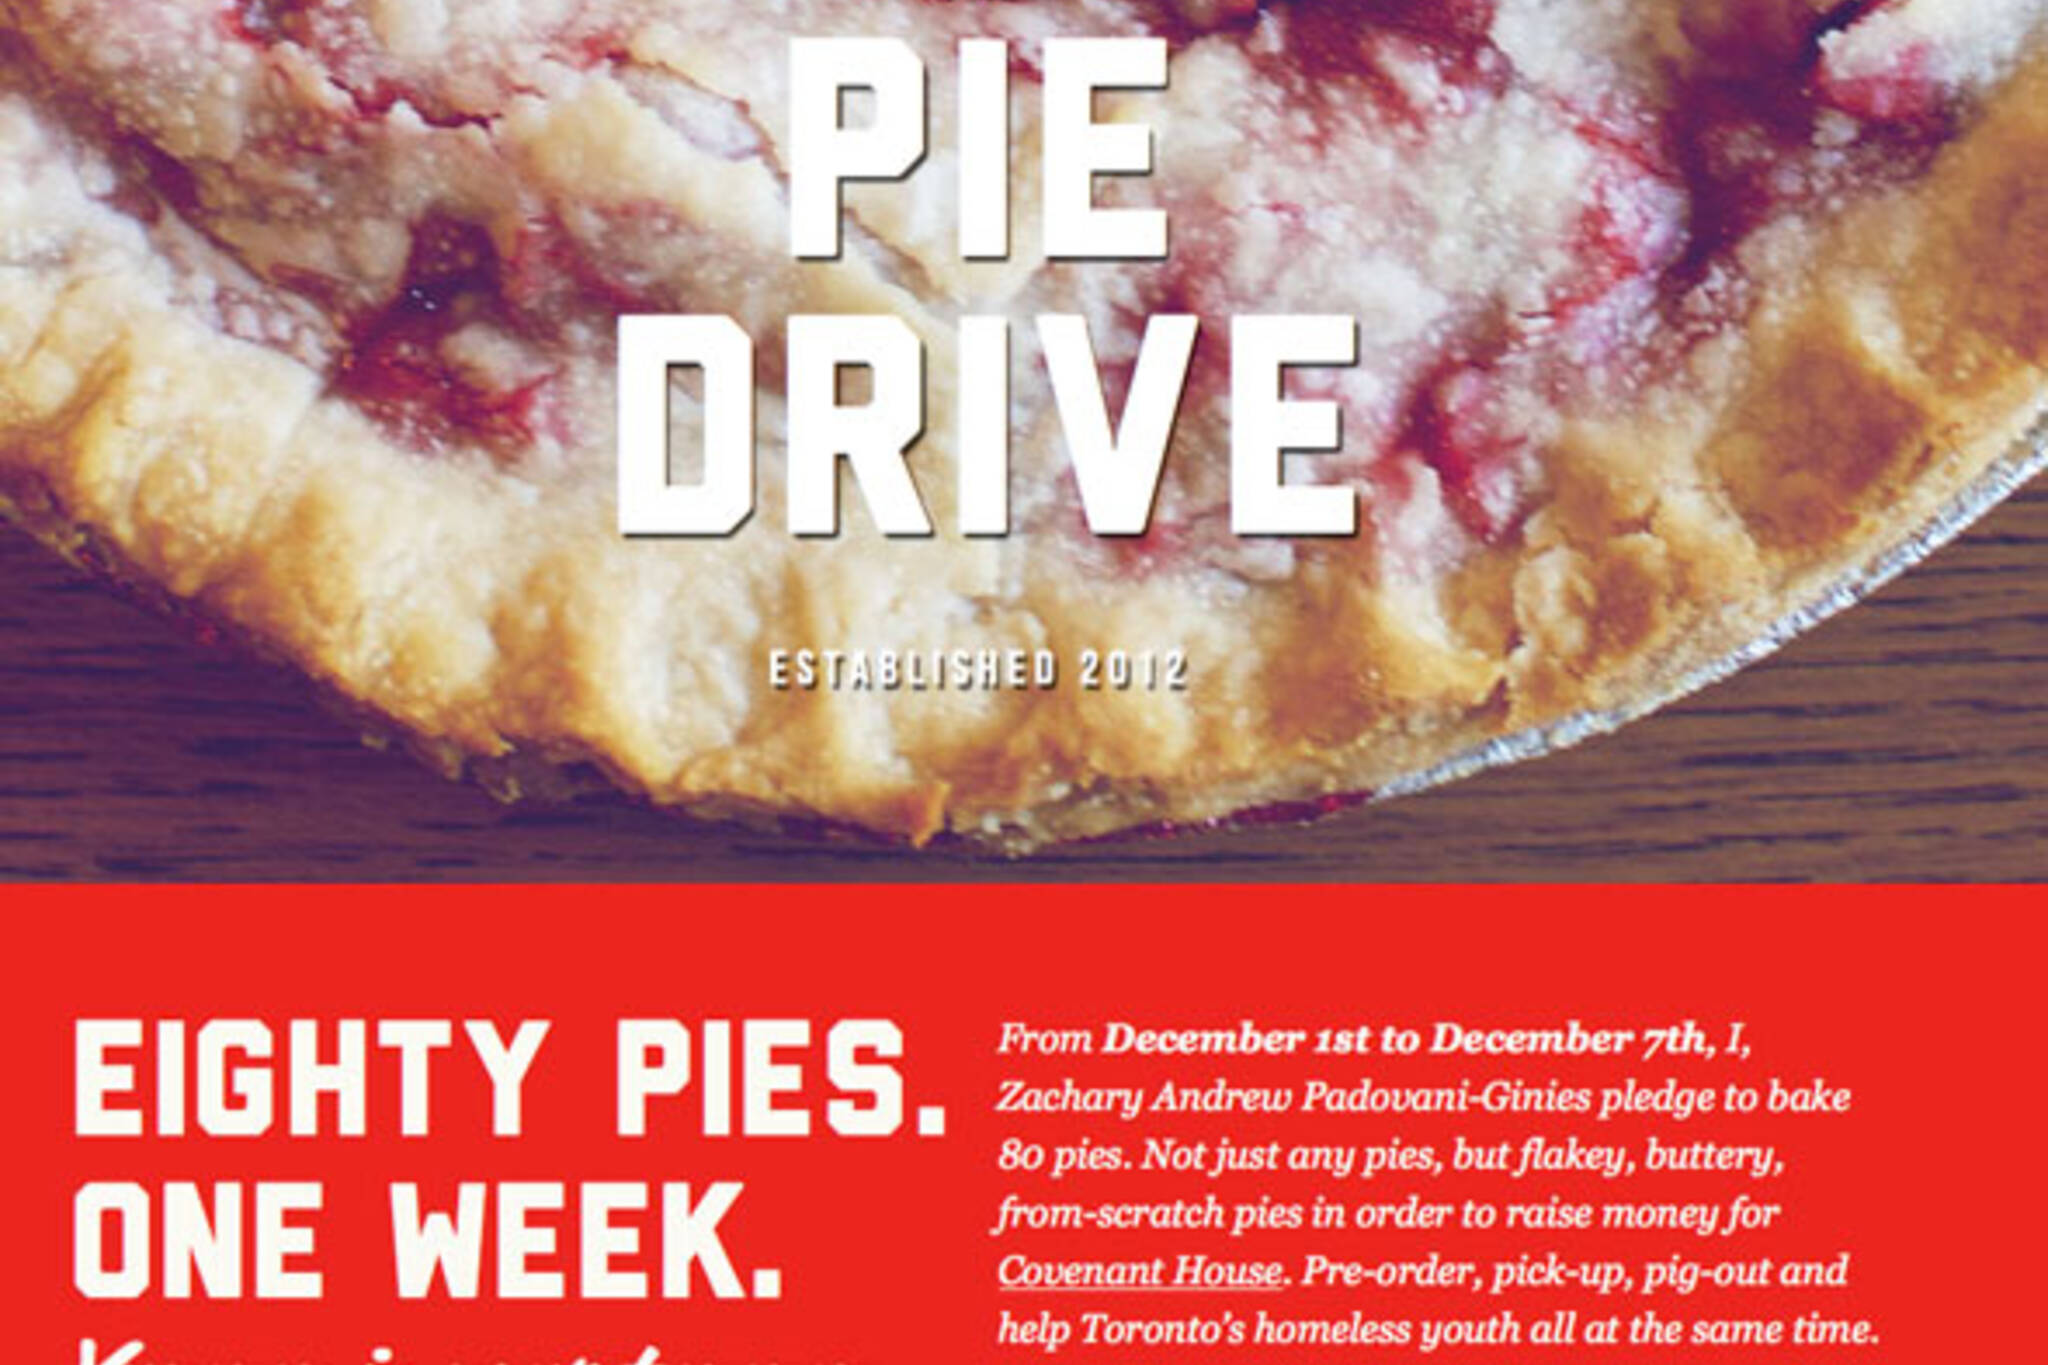 The Pie Drive